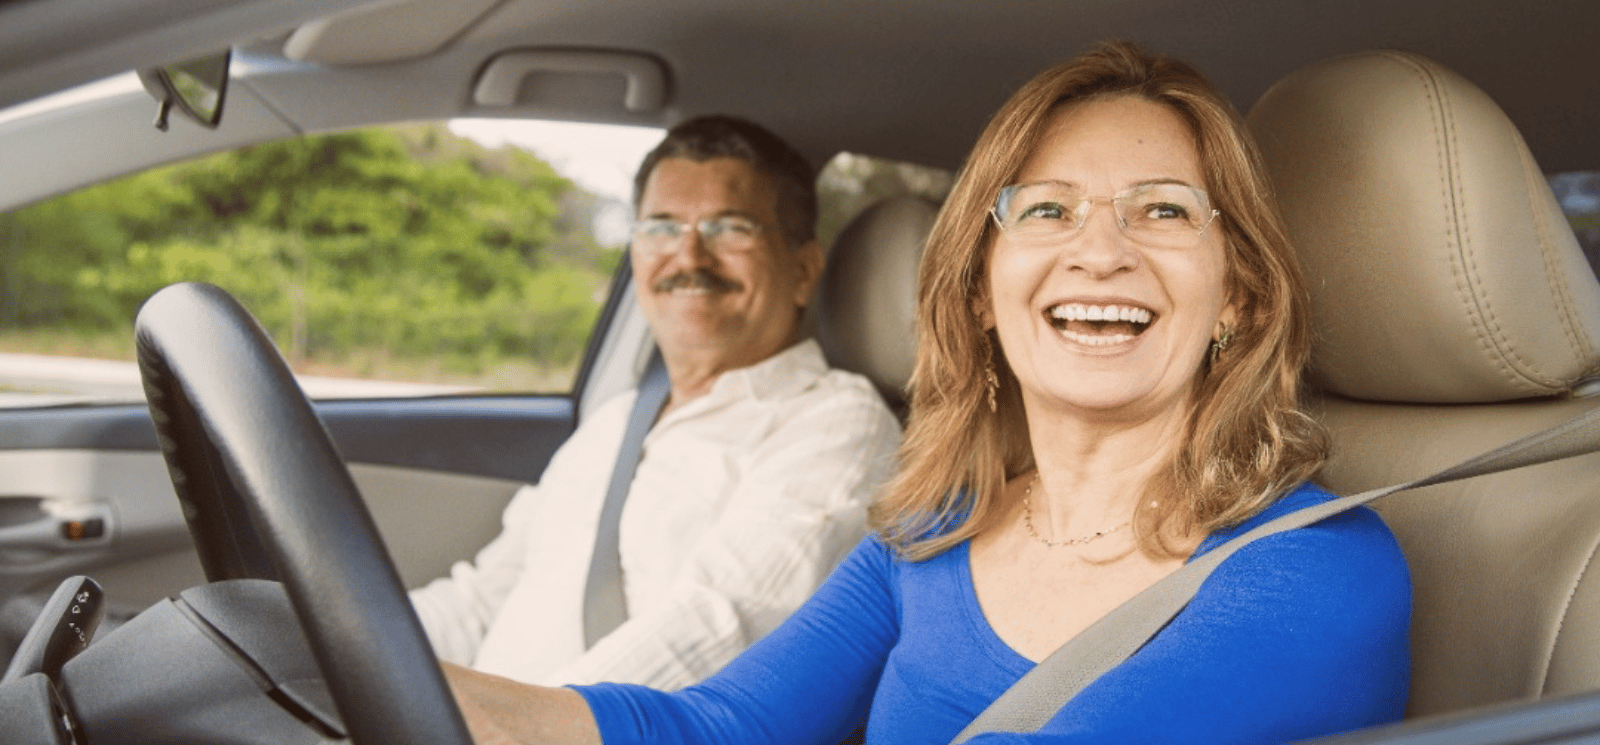 Couple sitting inside car and smiling